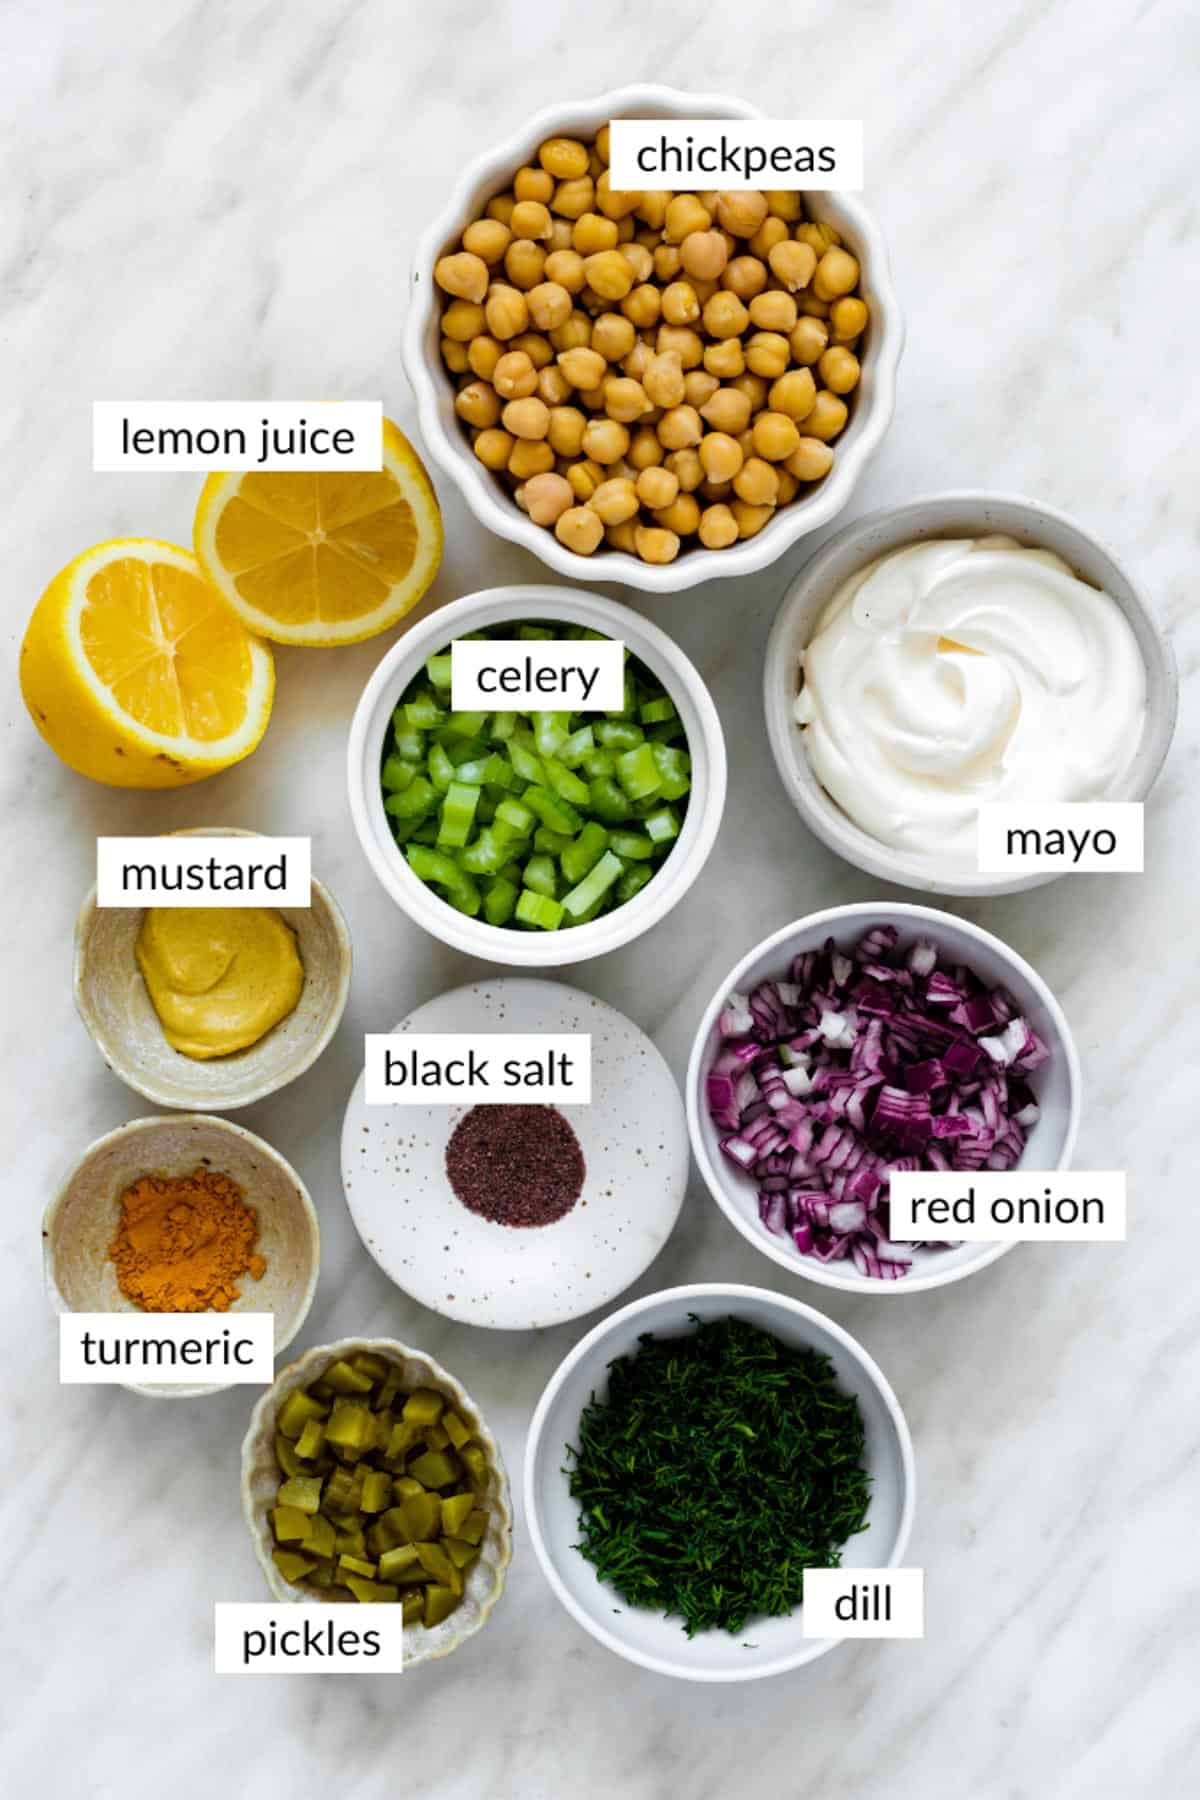 Gathered ingredients for making chickpea egg salad with text overlay on each ingredient.